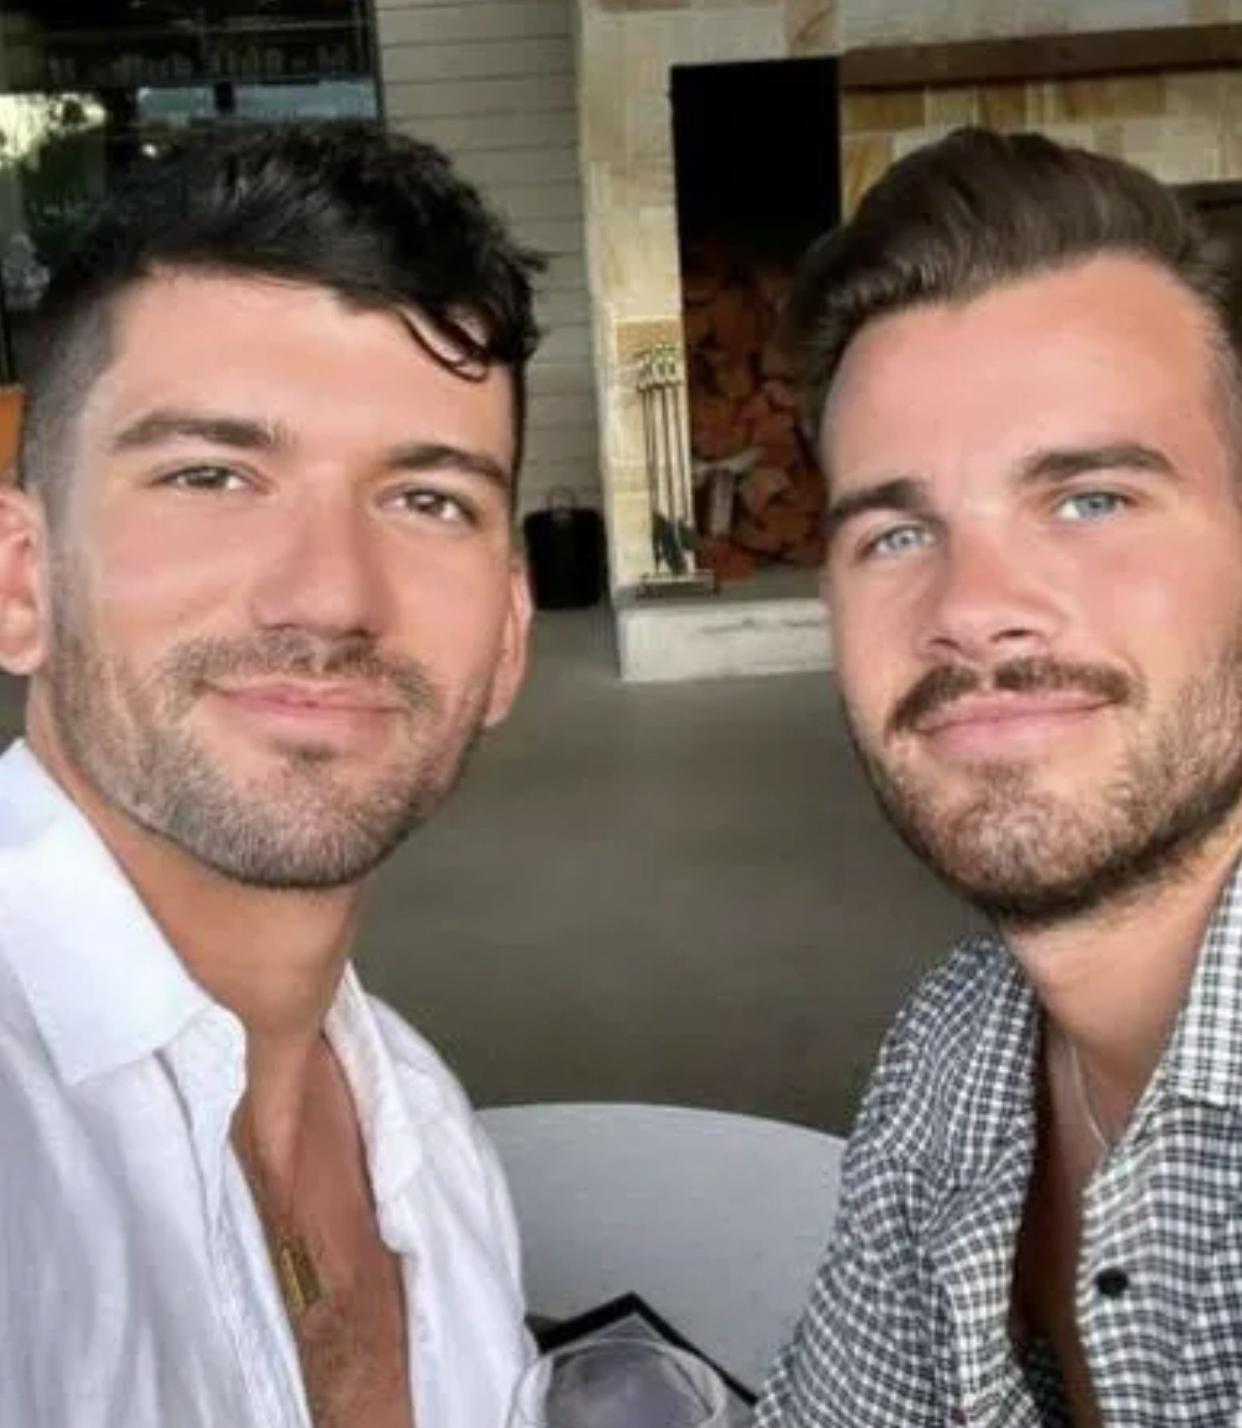 Missing Australian TV personality Jesse Baird and his boyfriend Luke Davies, who are feared to be dead